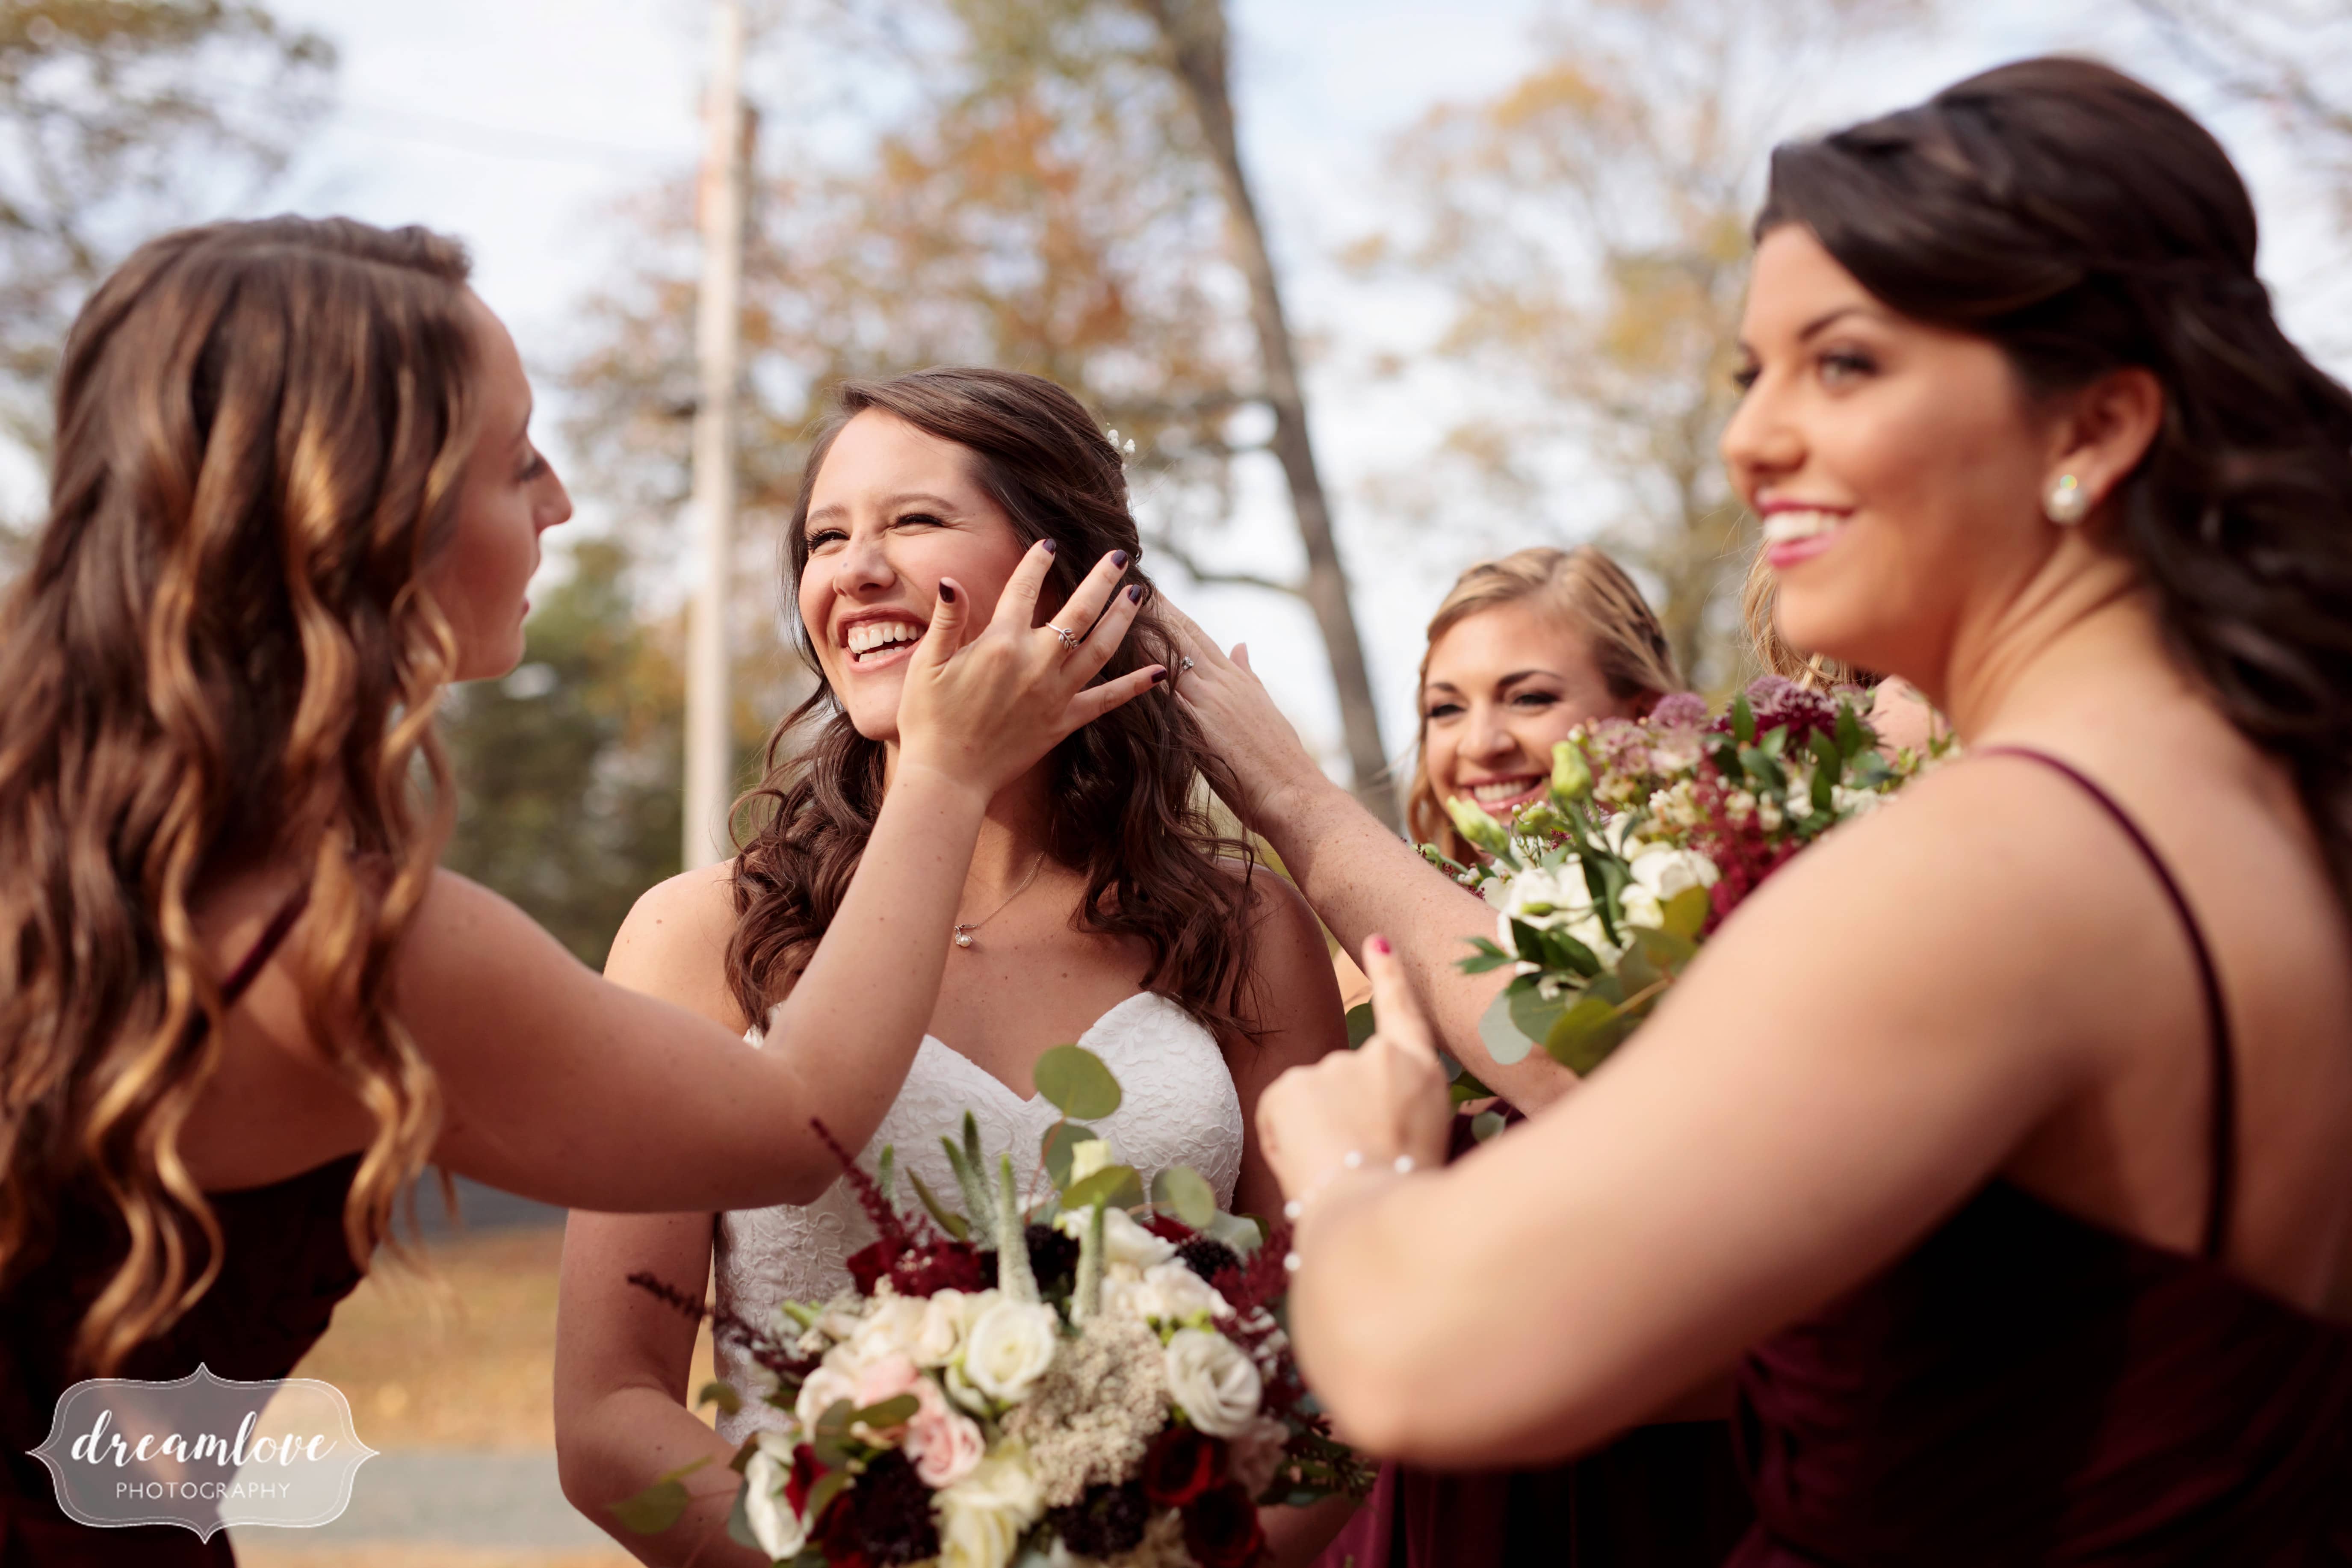 Happy wedding photography of the bride being helped by her bridesmaids at Pavilion on Crystal Lake wedding.